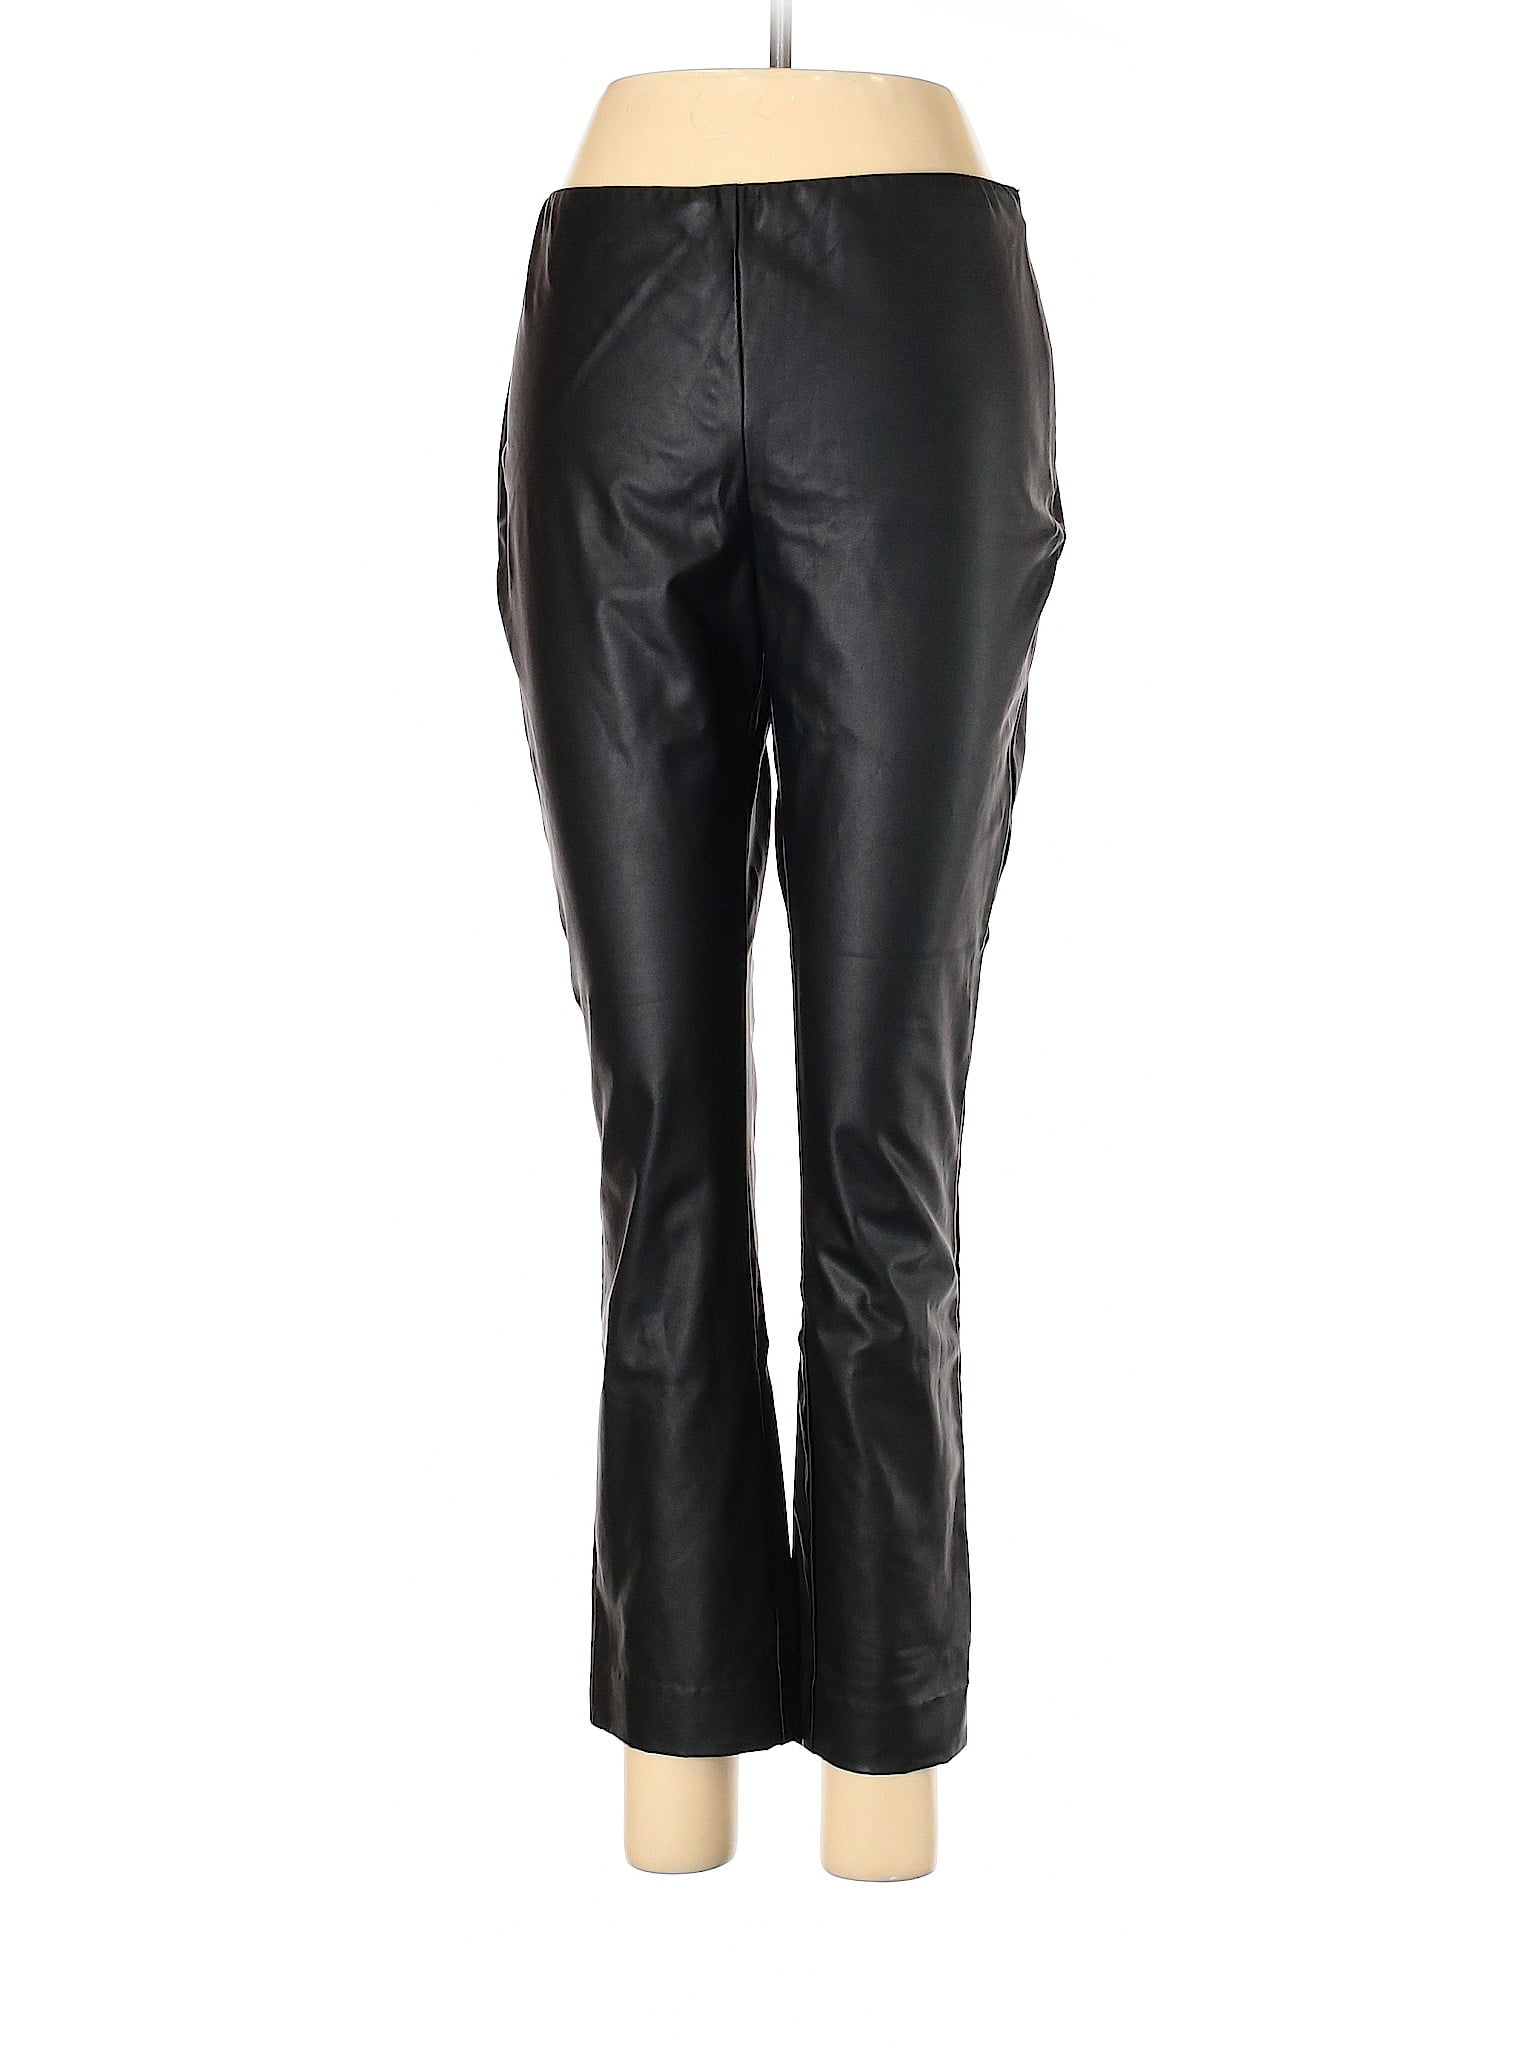 leather pants size 6